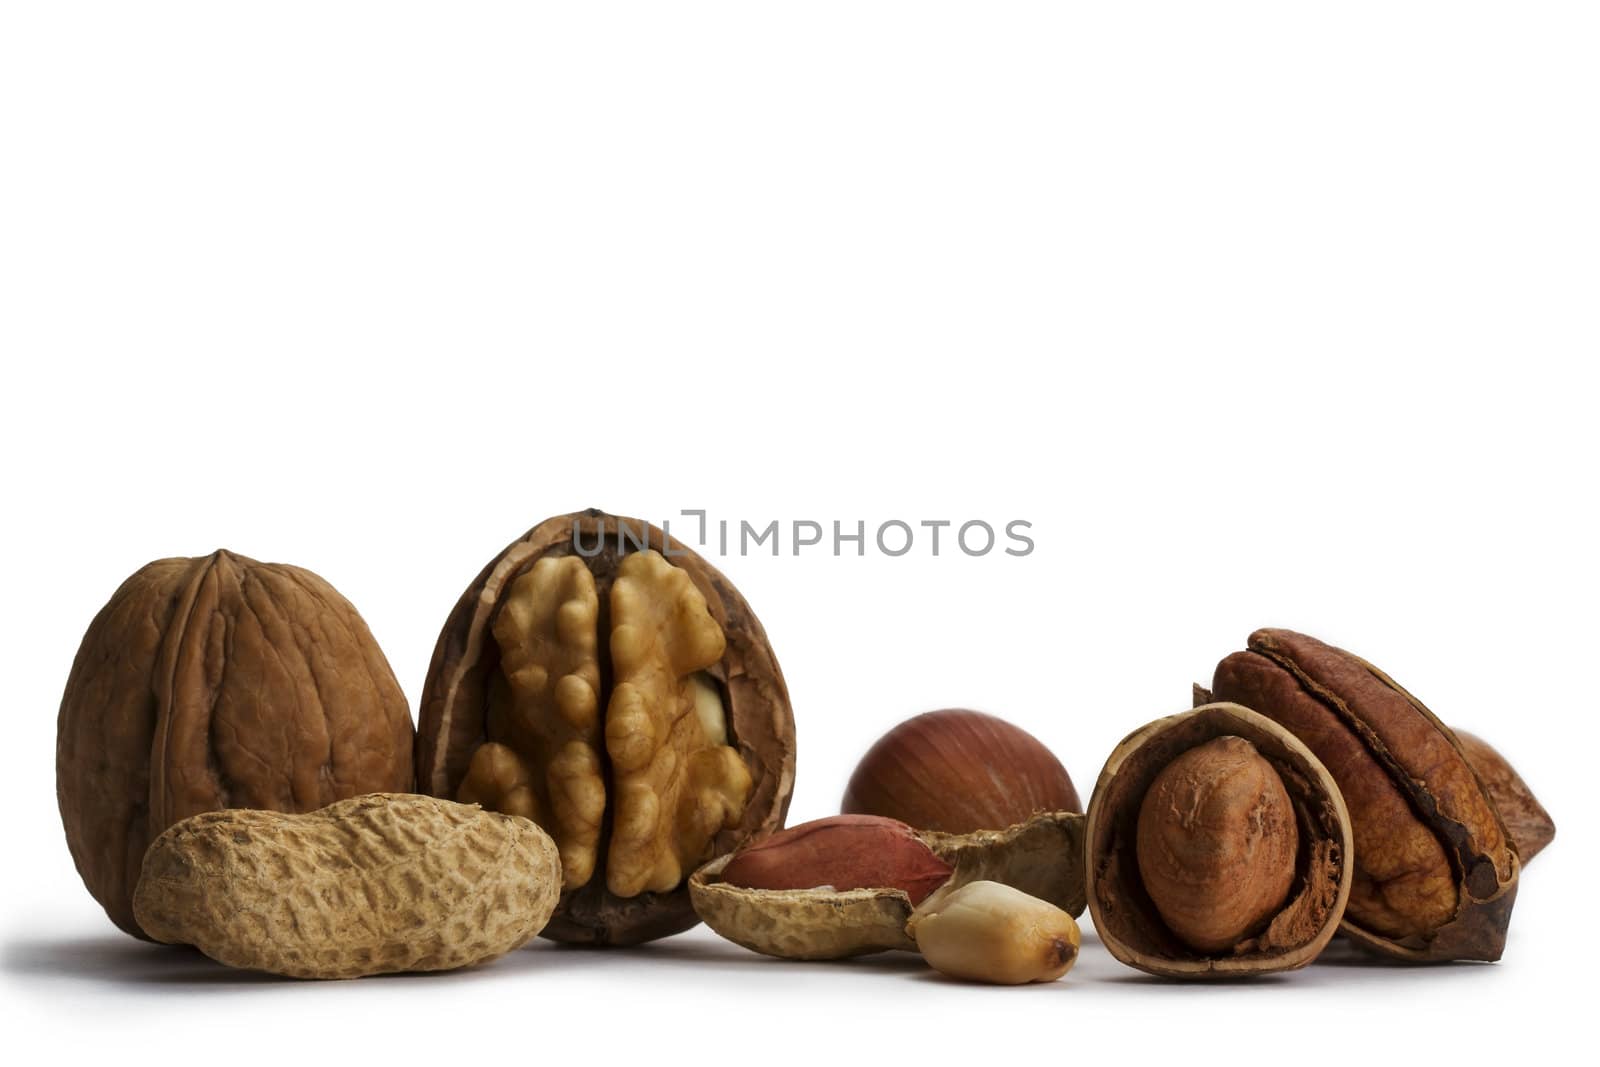 cracked and closed pecans walnuts hazelnuts and peanuts on white background